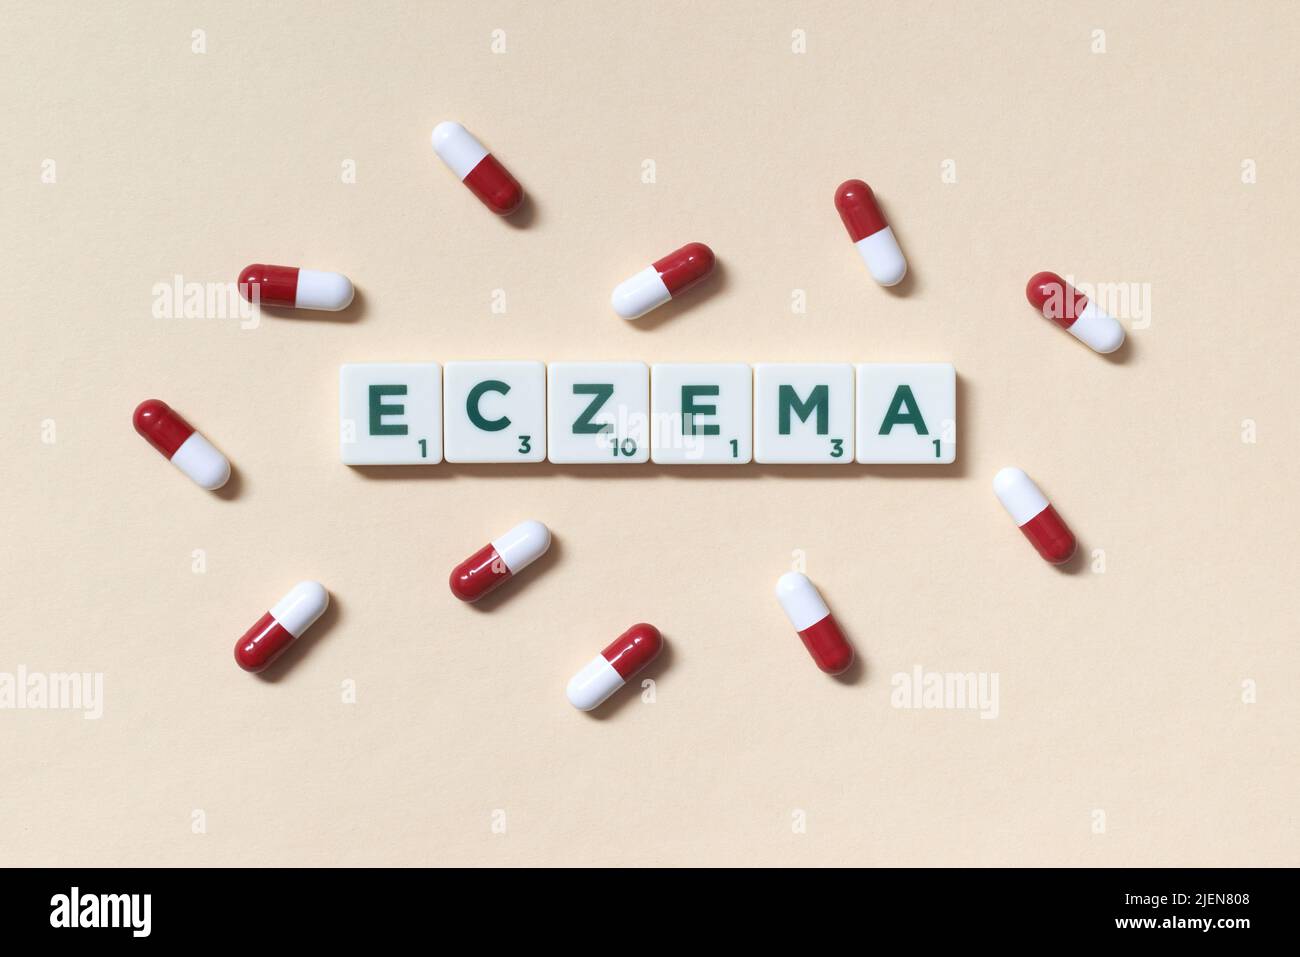 Eczema formed of scrabble blocks and pharmaceutical pills. Stock Photo